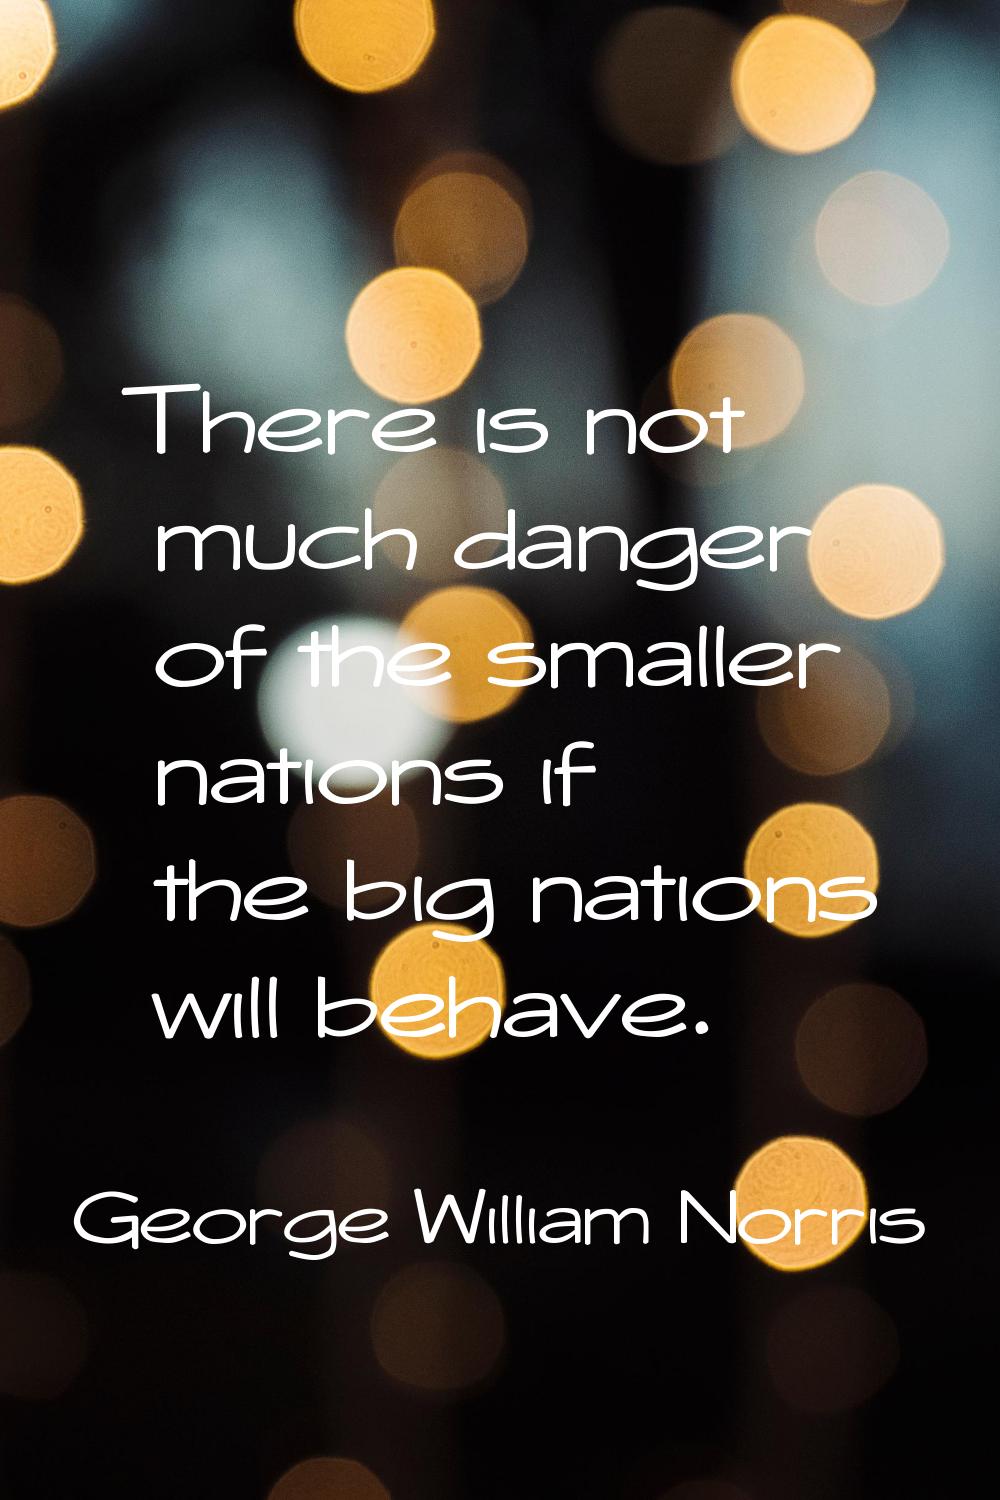 There is not much danger of the smaller nations if the big nations will behave.